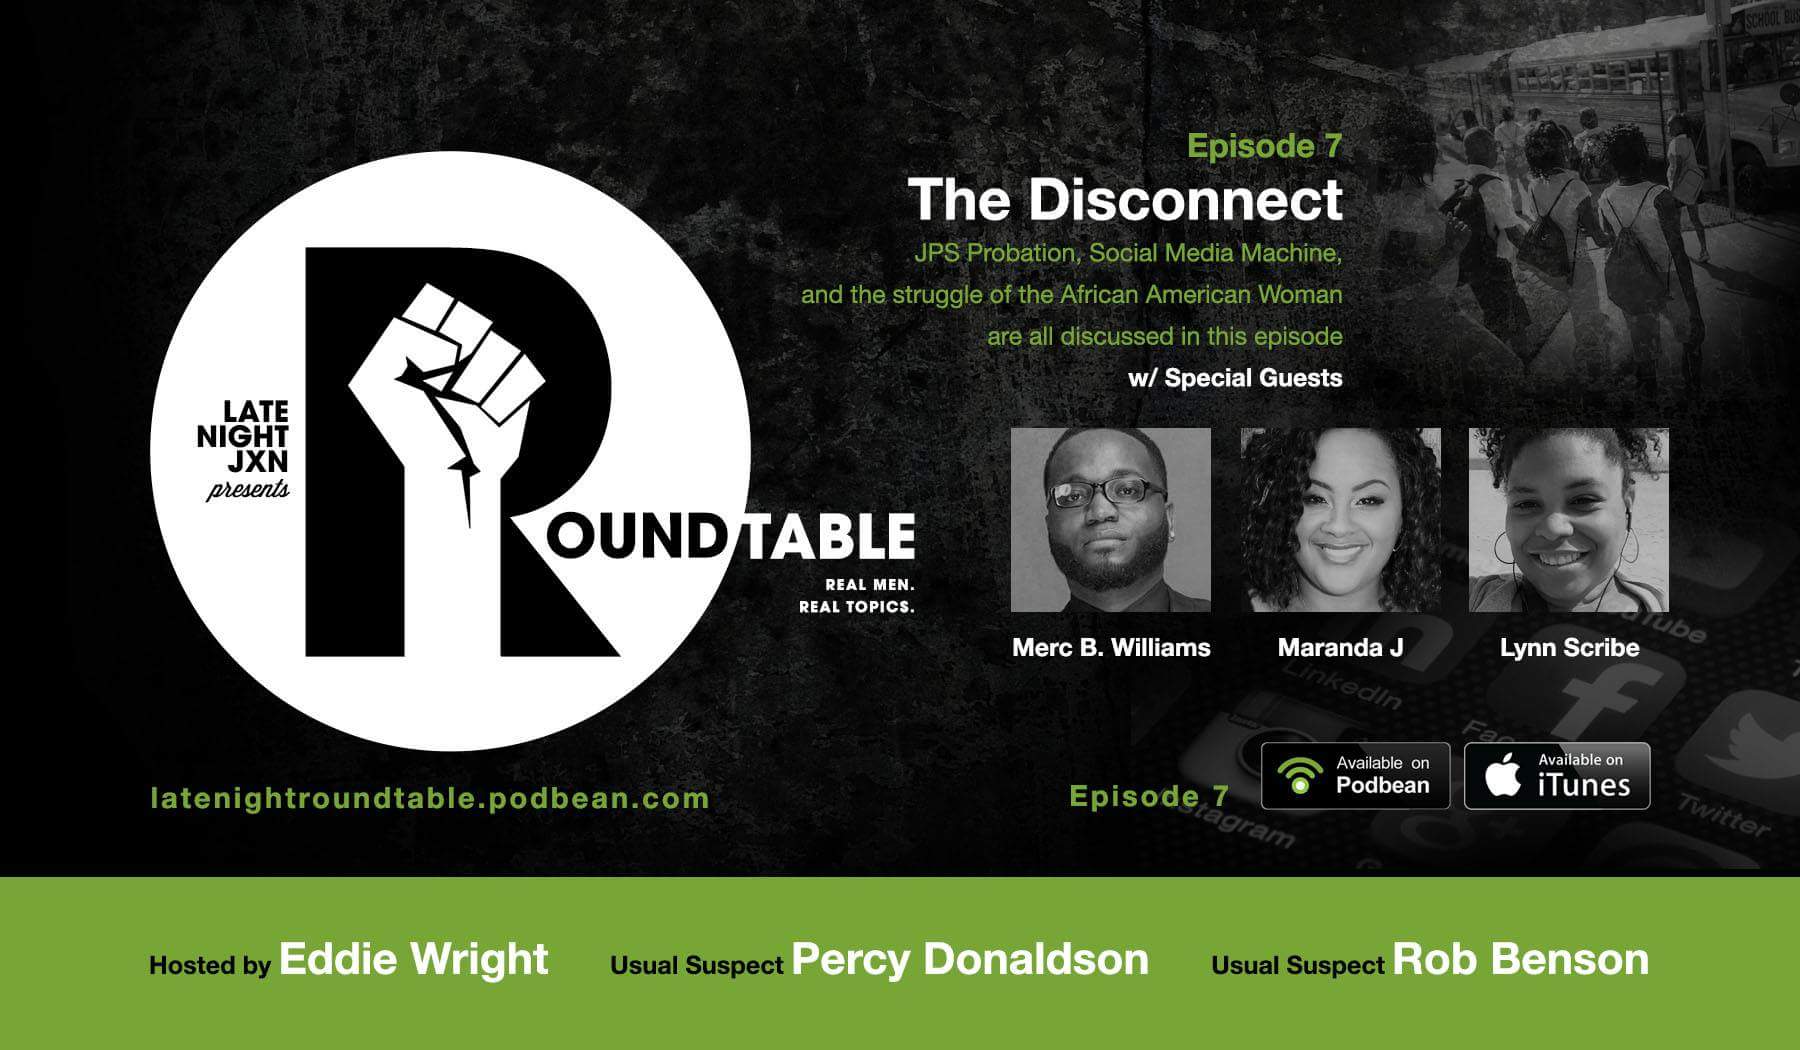 The Disconnect-The battle of respect from the male counter part and female demographic, along with more edge talk and the social media mind game. All is covered in this episode